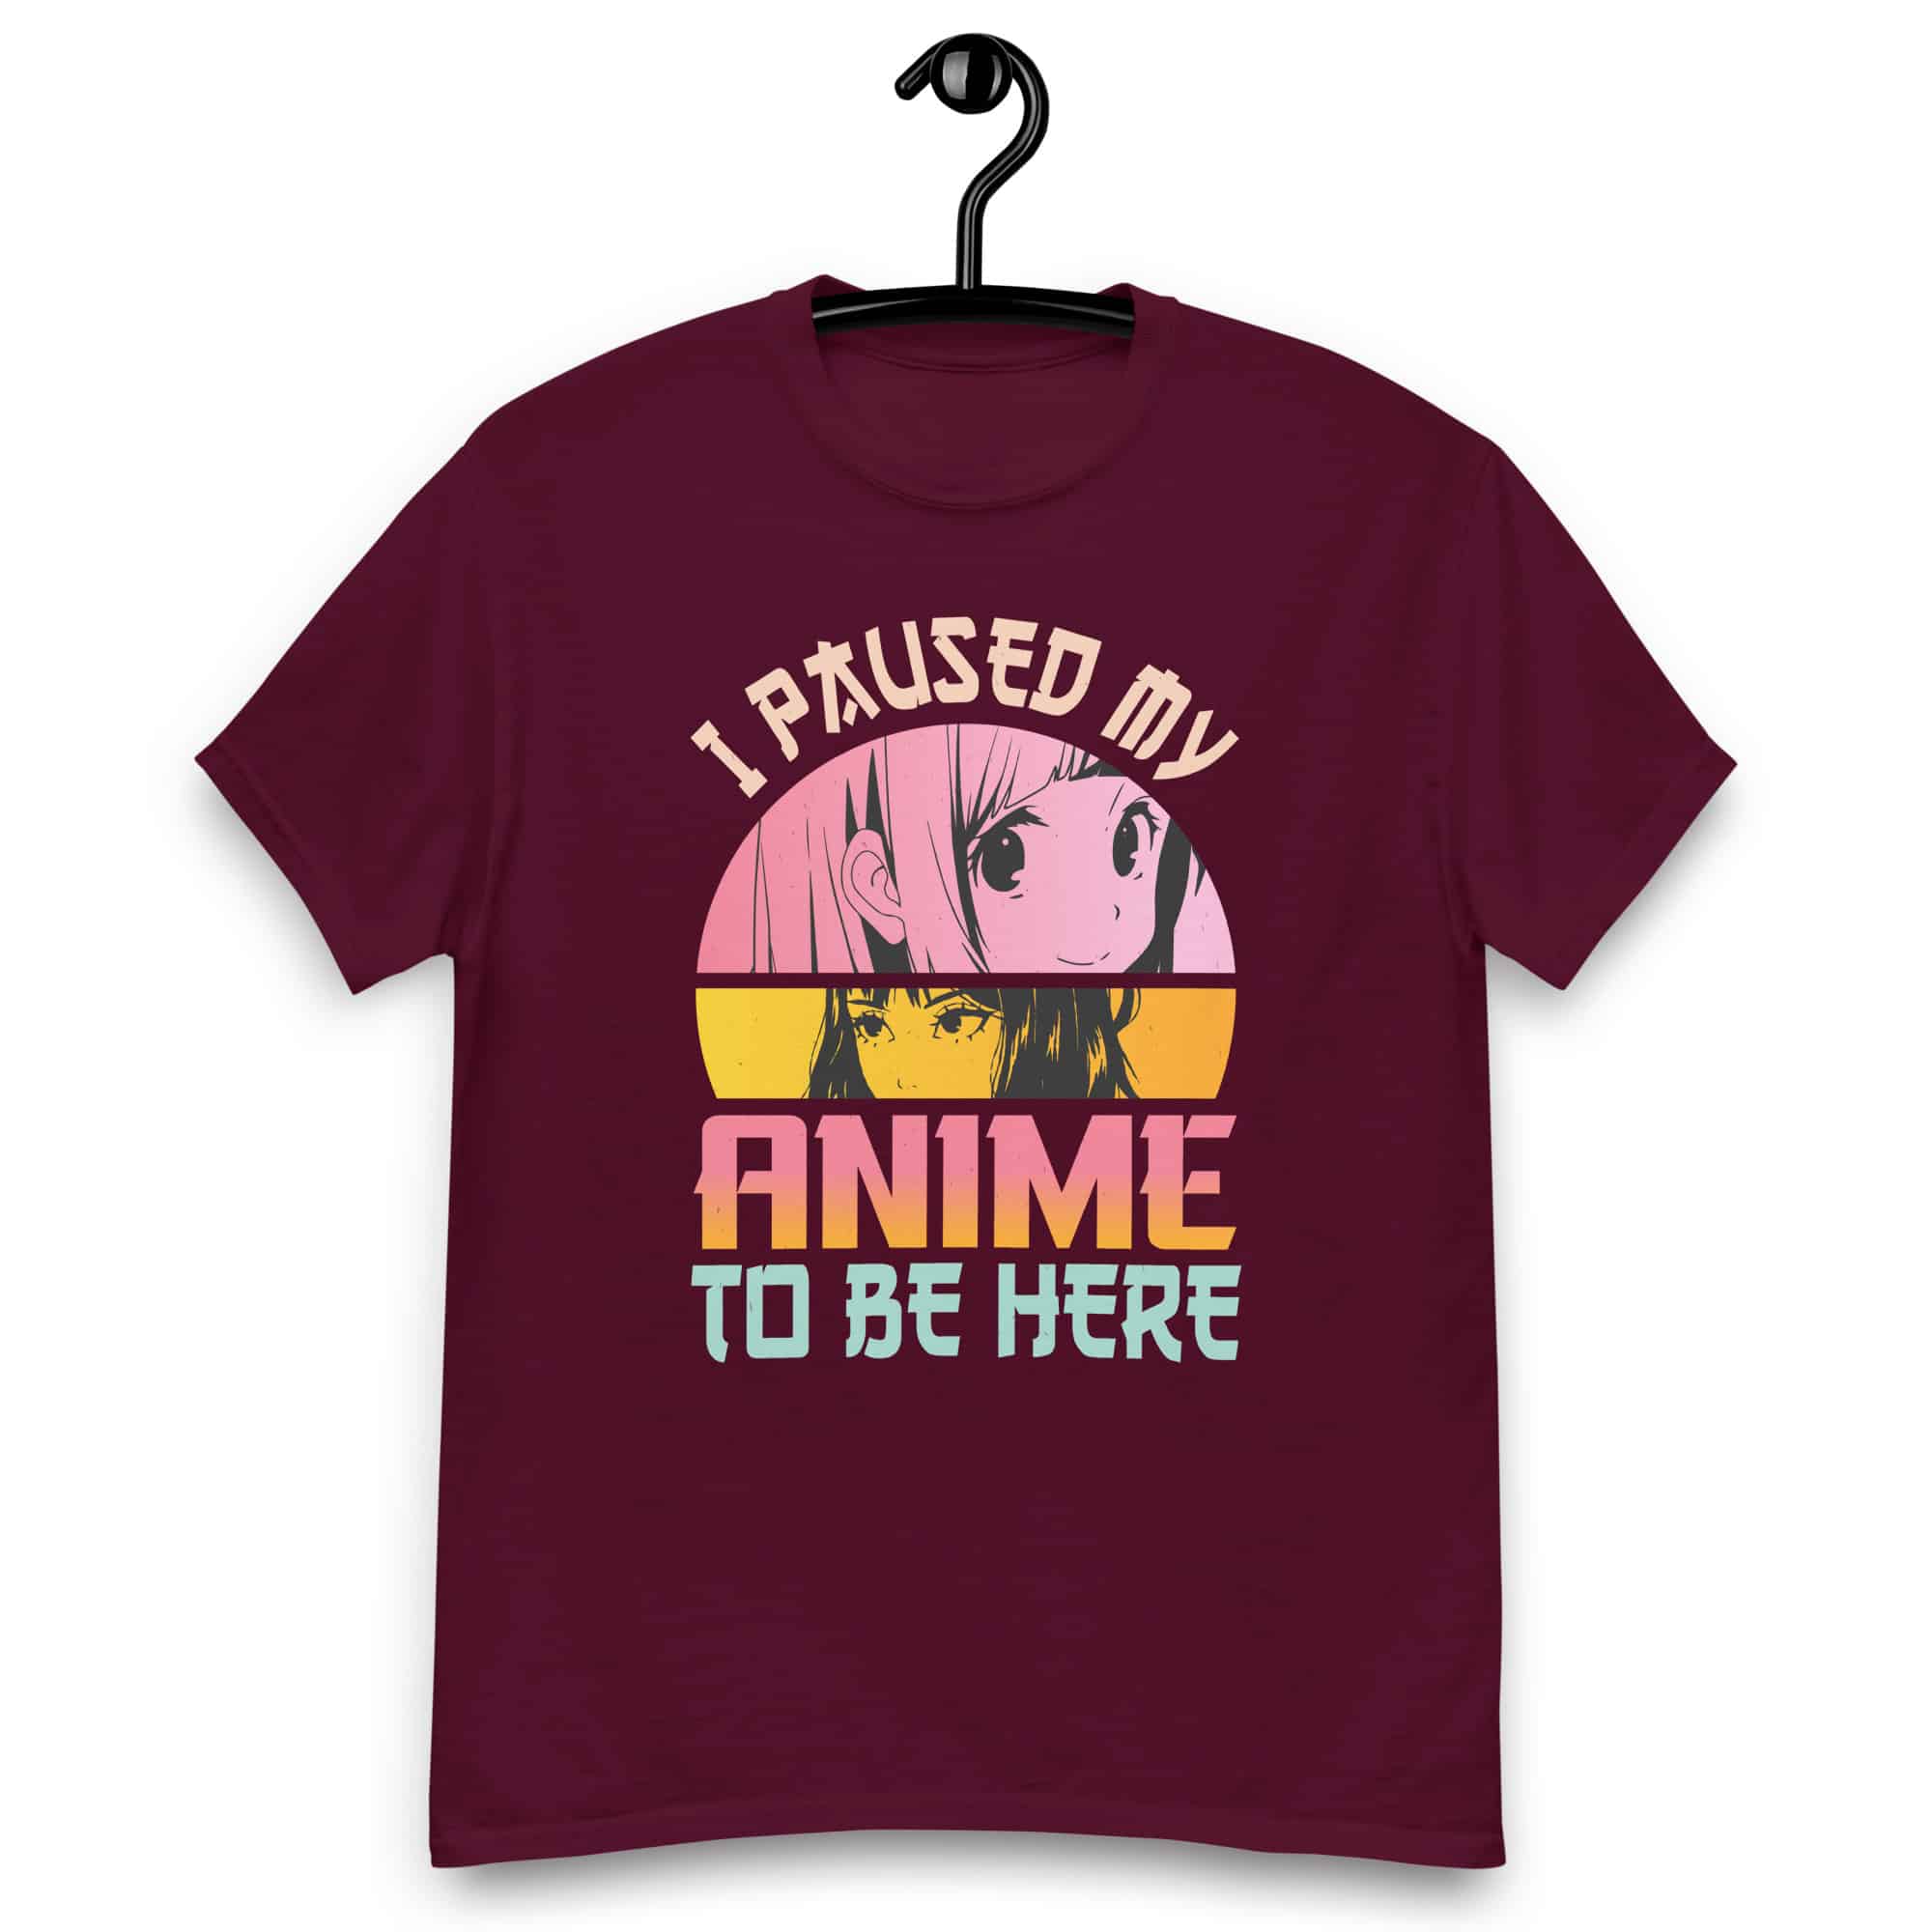 I Paused My Anime Shirt Men's graphic t-shirts Men's designer shirts Premium sweatshirts Unisex hoodies Premium hooded sweatshirts Designer sweatshirts High-quality sweatshirts Luxury sweatshirts Unisex fleece sweatshirts Premium pullover sweatshirts Unisex heavyweight sweatshirts Premium cotton sweatshirts Video game store Gaming merchandise Gaming accessories shop Online gaming store Video game shop near me Gaming console store PC gaming store Gaming gear shop Retro gaming shop Board game shop Anime merchandise Anime store online Japanese anime shop Anime figurines Manga shop Anime DVDs Anime accessories Anime apparel Anime collectibles Anime gifts